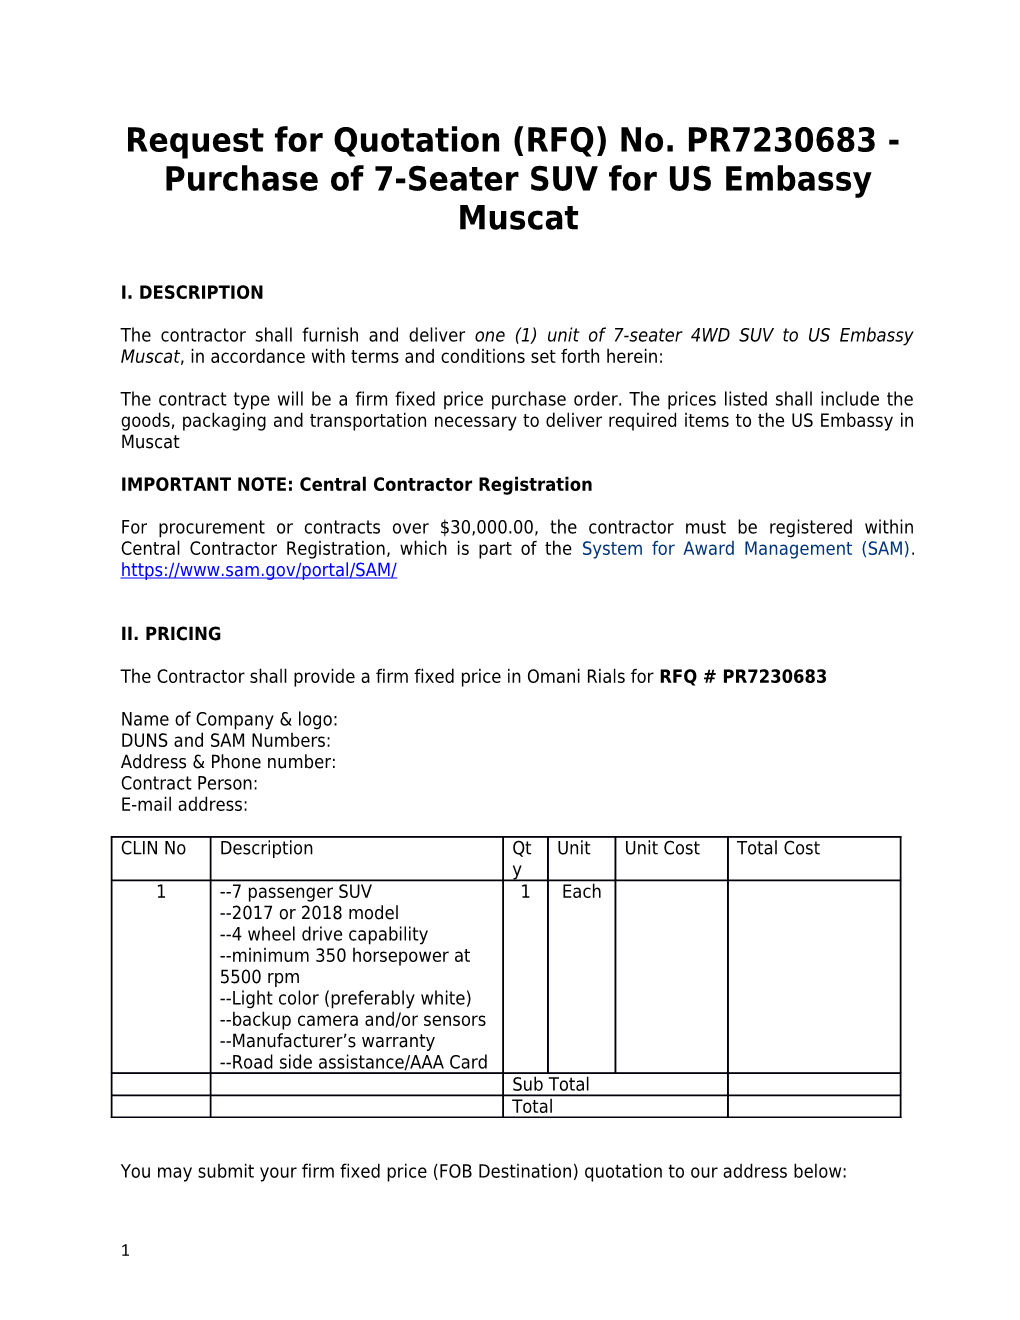 Request for Quotation (RFQ) No. PR7230683 - Purchase of 7-Seater SUV for US Embassy Muscat